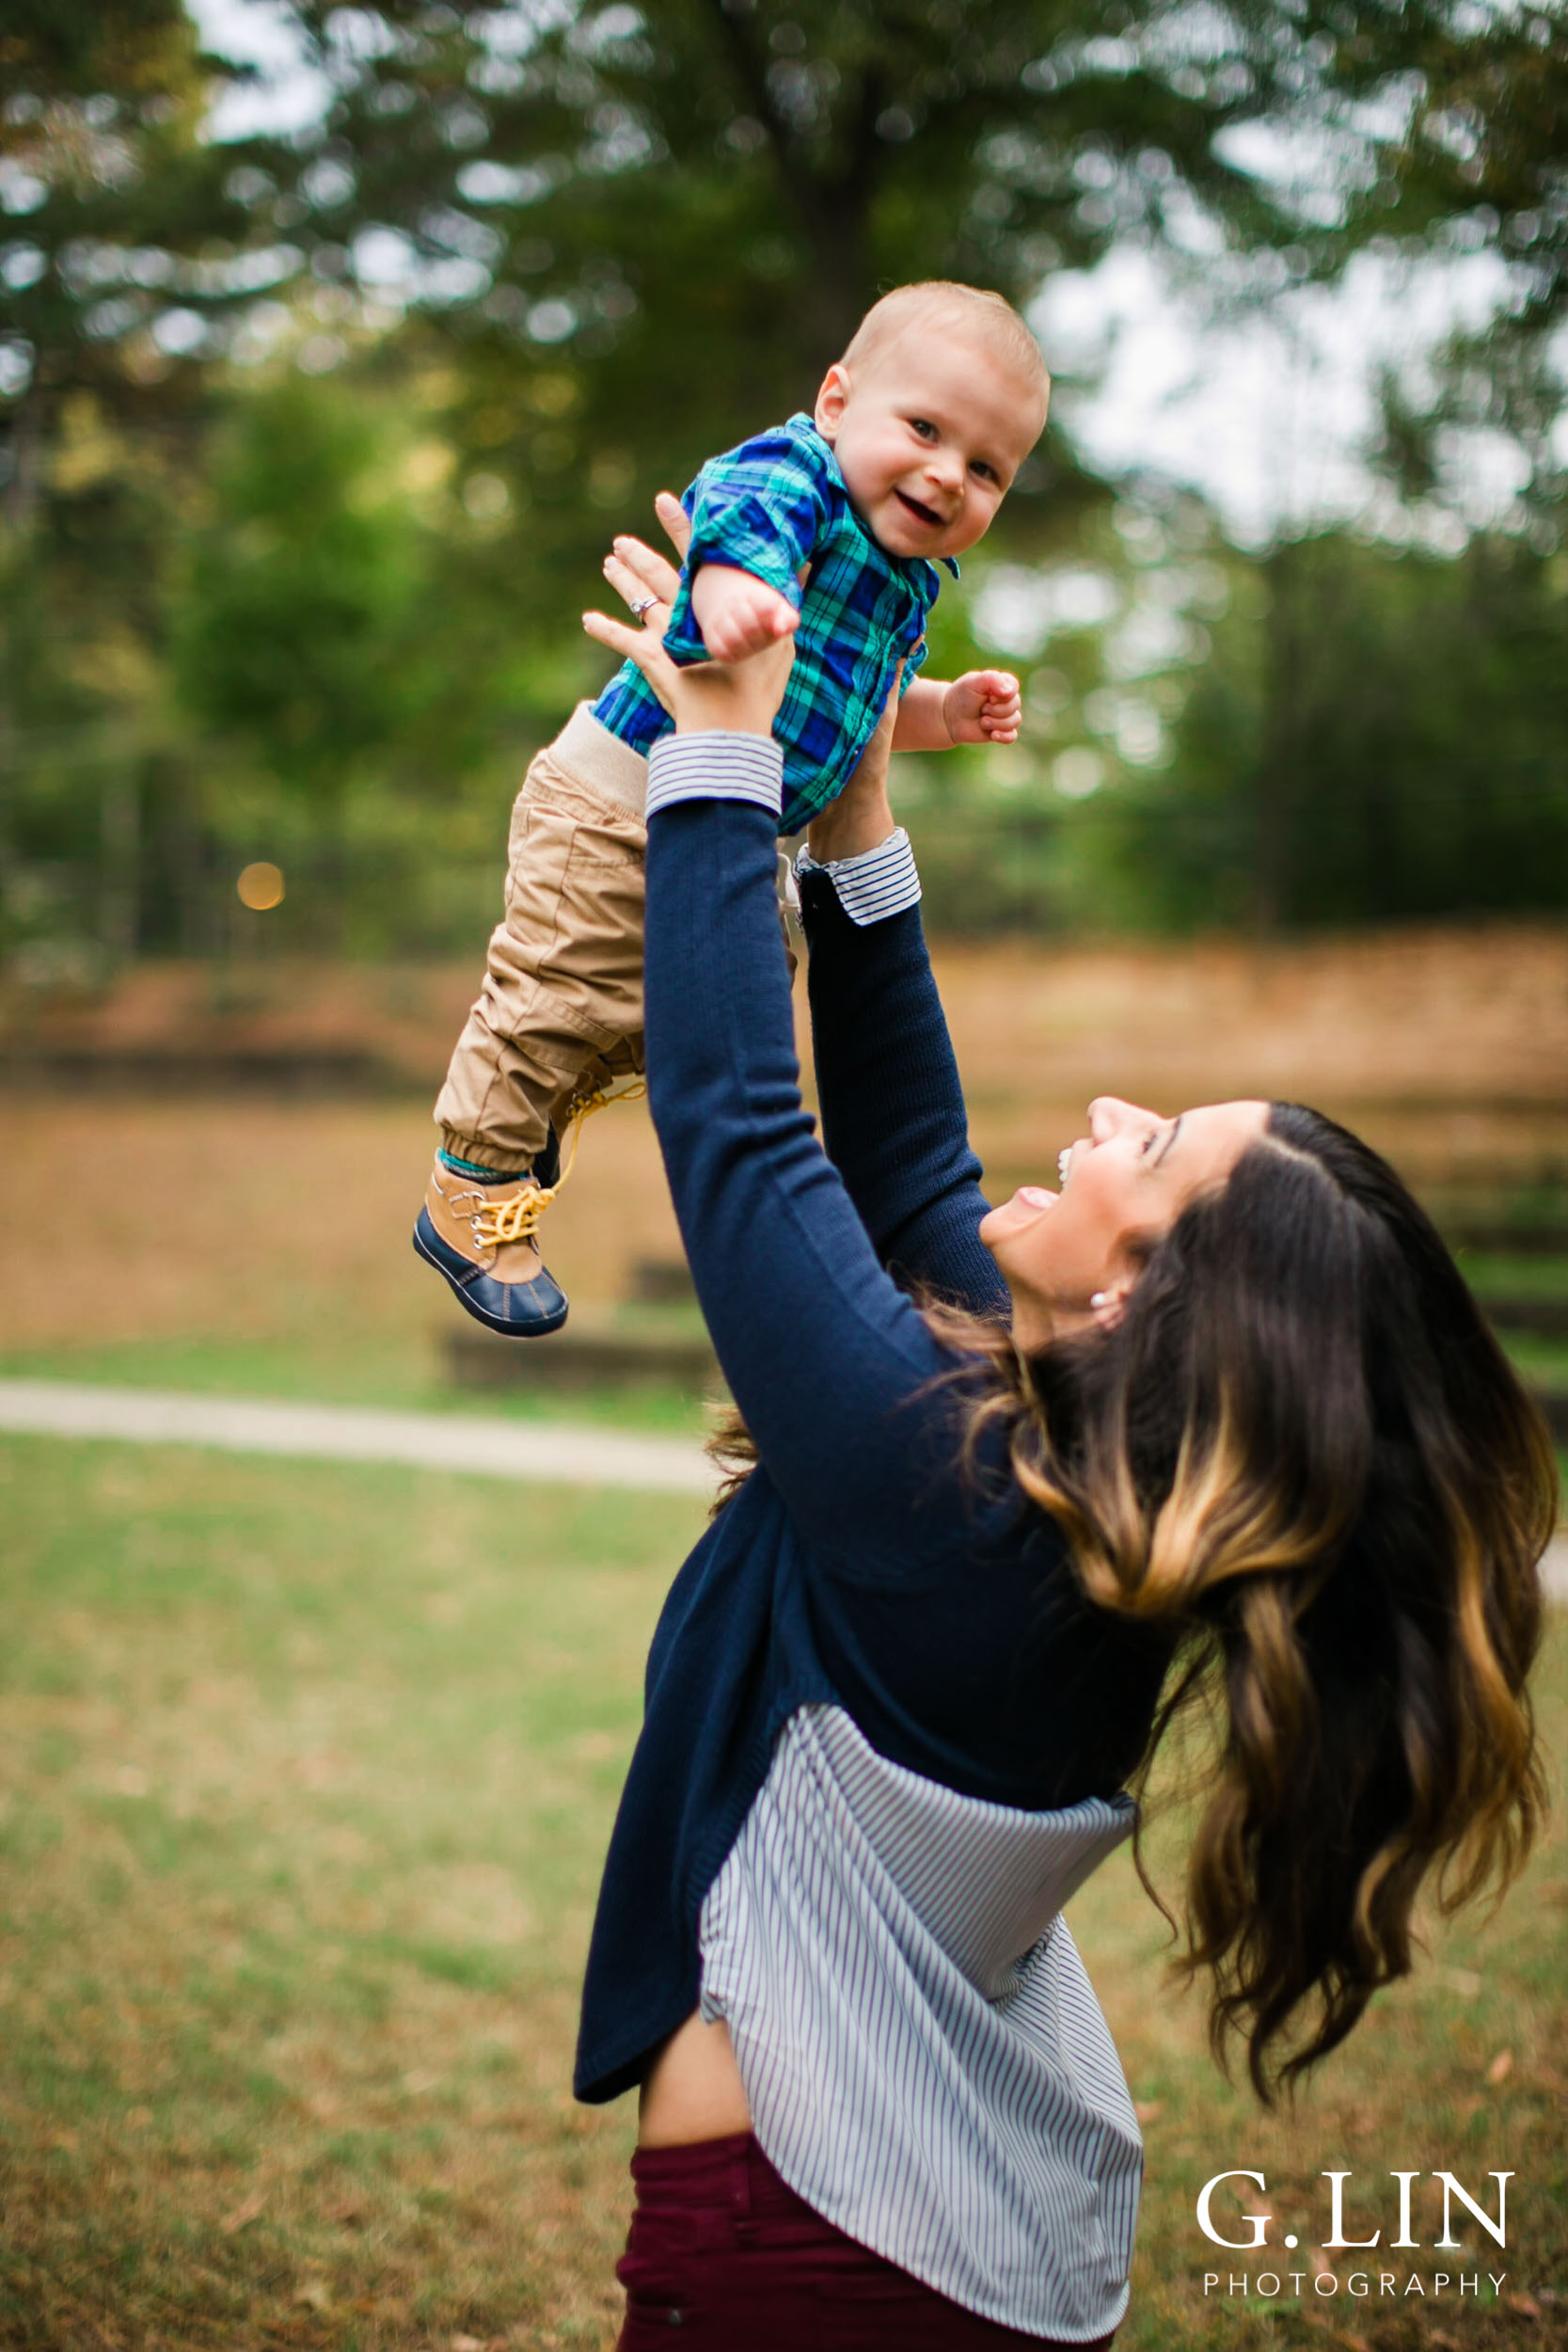 Raleigh Lifestyle Newborn Photography | G. LIn photography | Mom tossing baby boy in the air